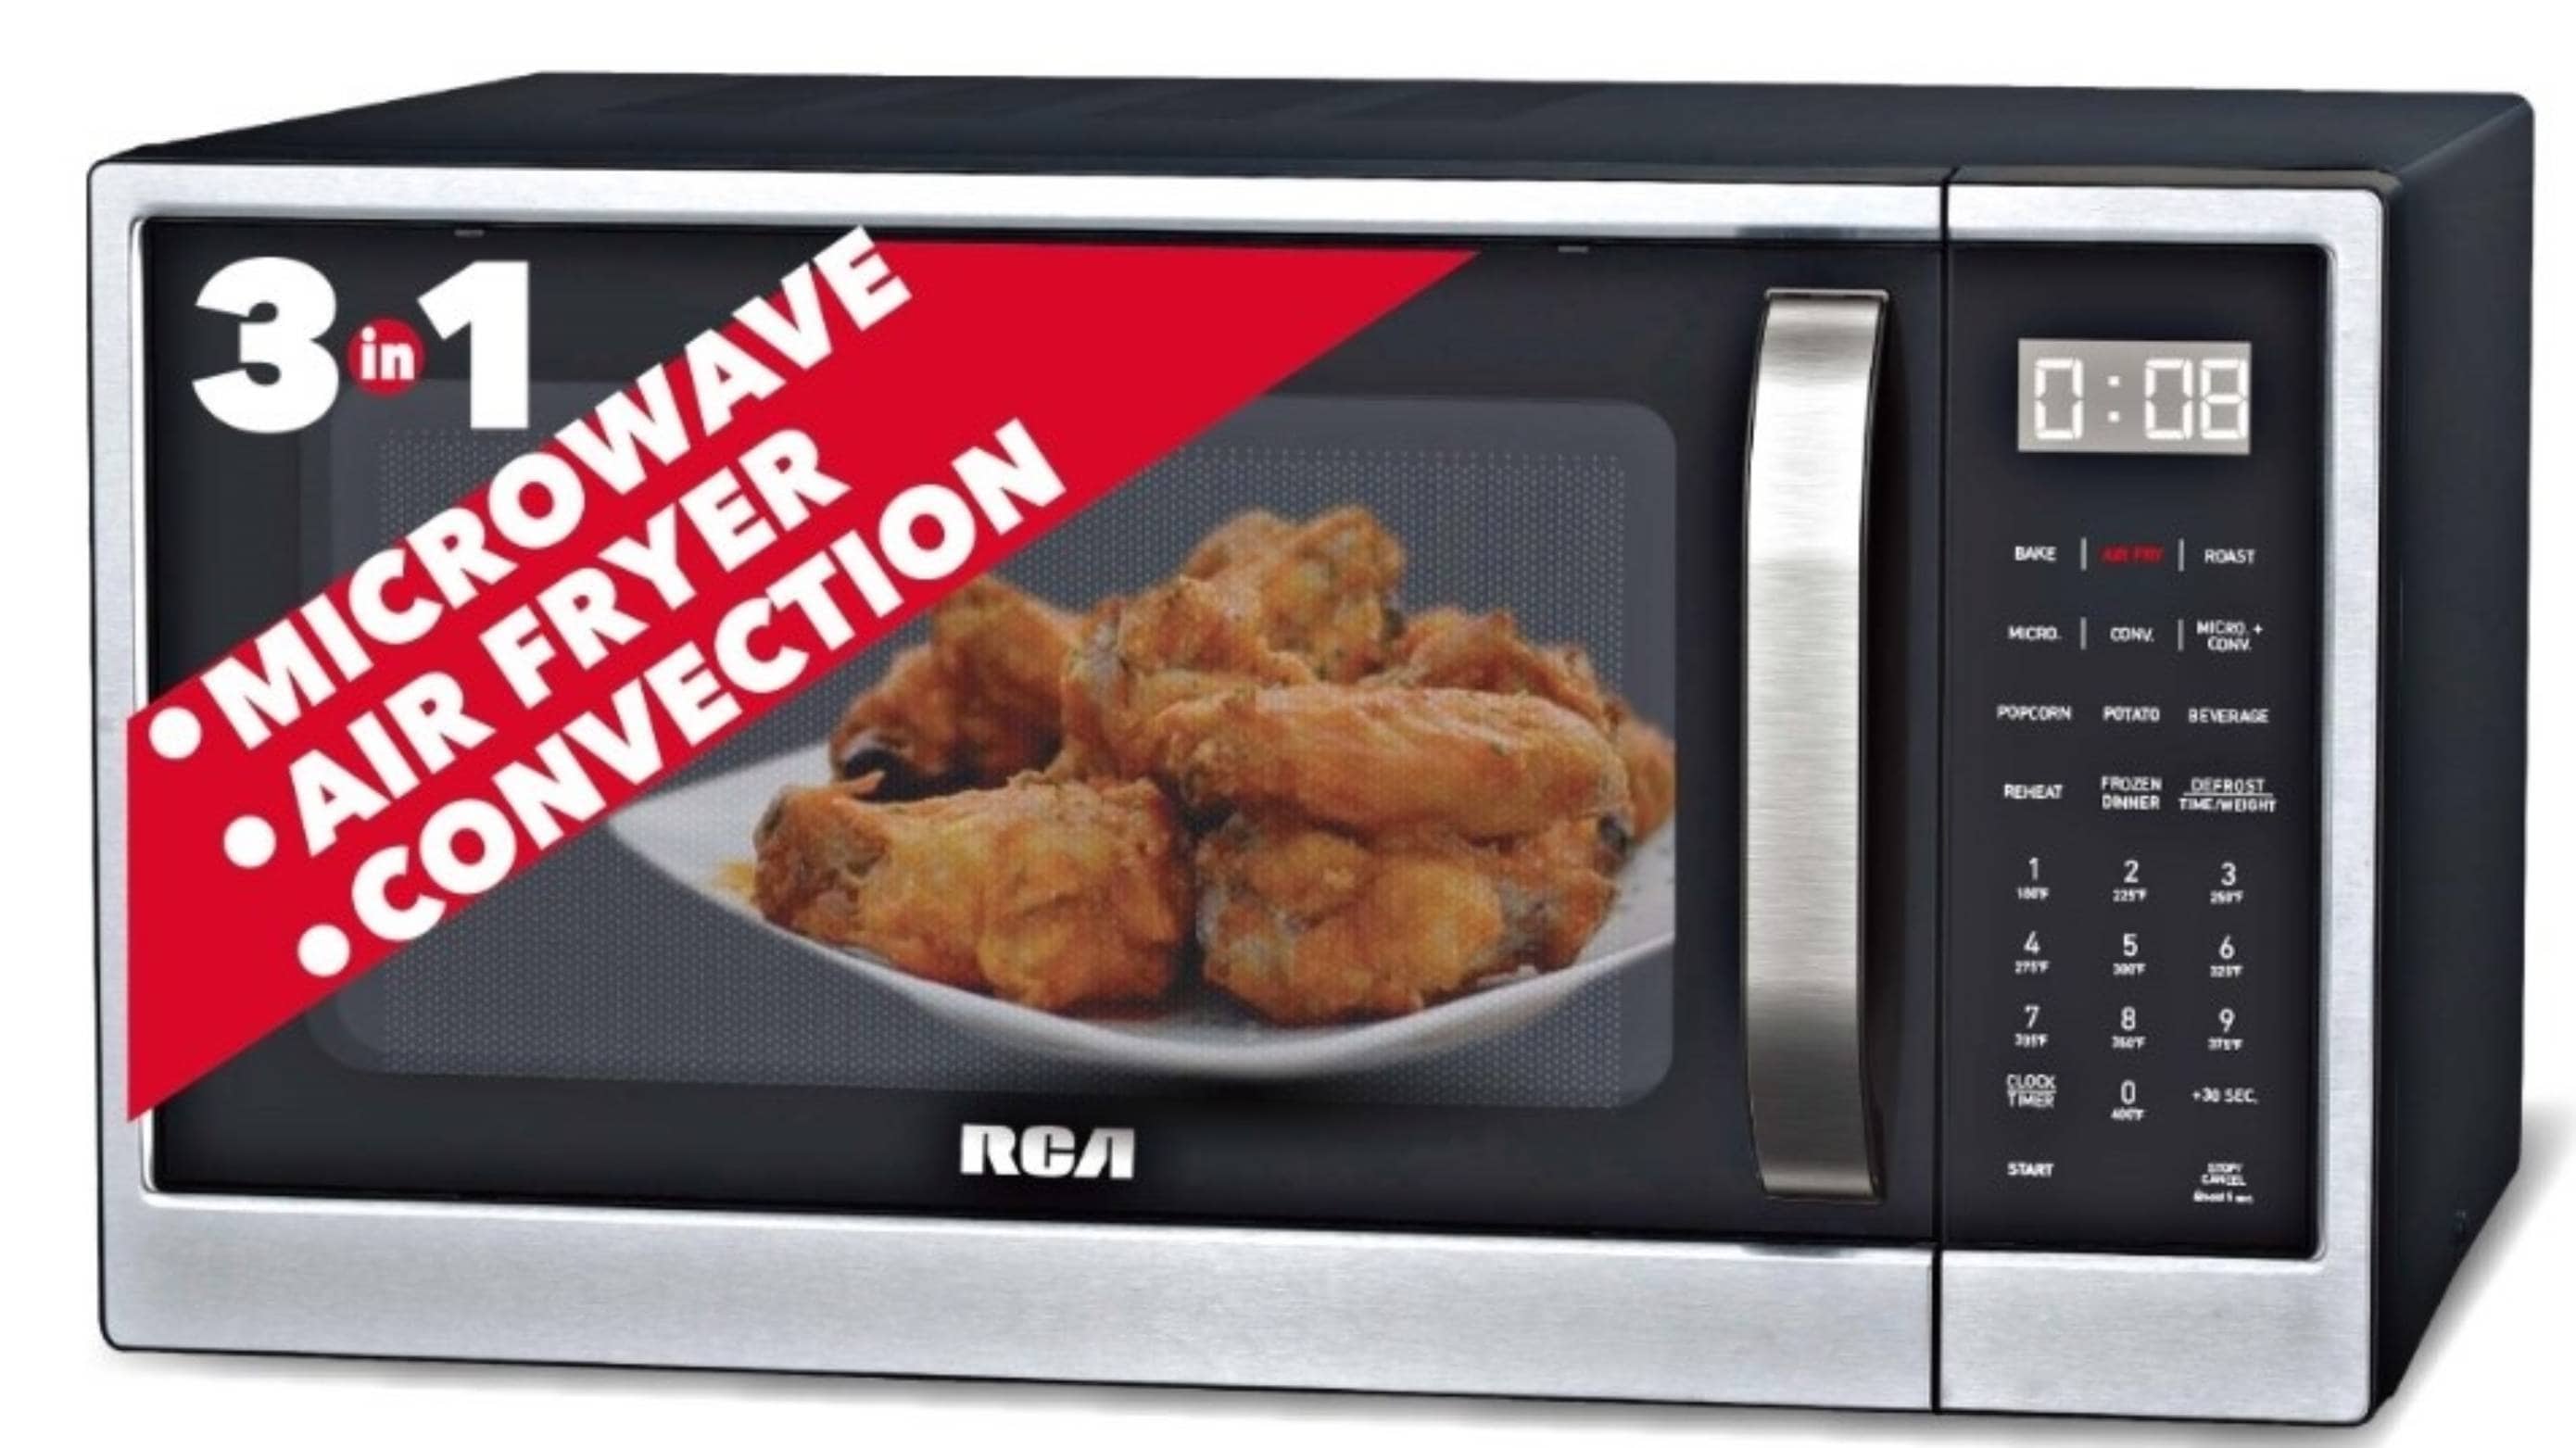 1.2 CU FTMICROWAVE STAINLESS STEEL – AIR FRYER & CONVECTION